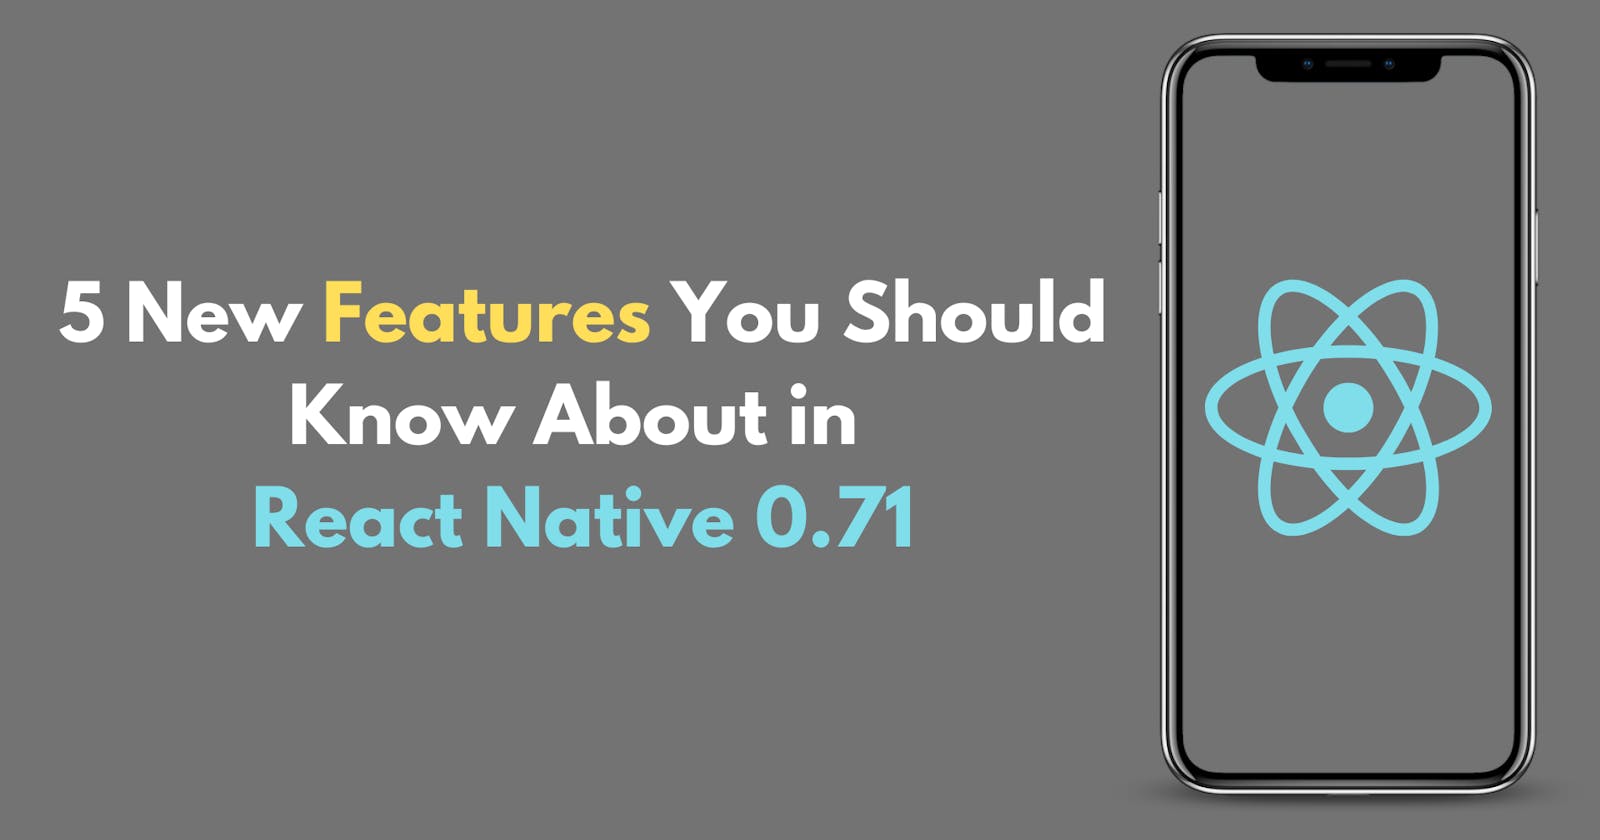 5 New Features You Should Know About in React Native 0.71